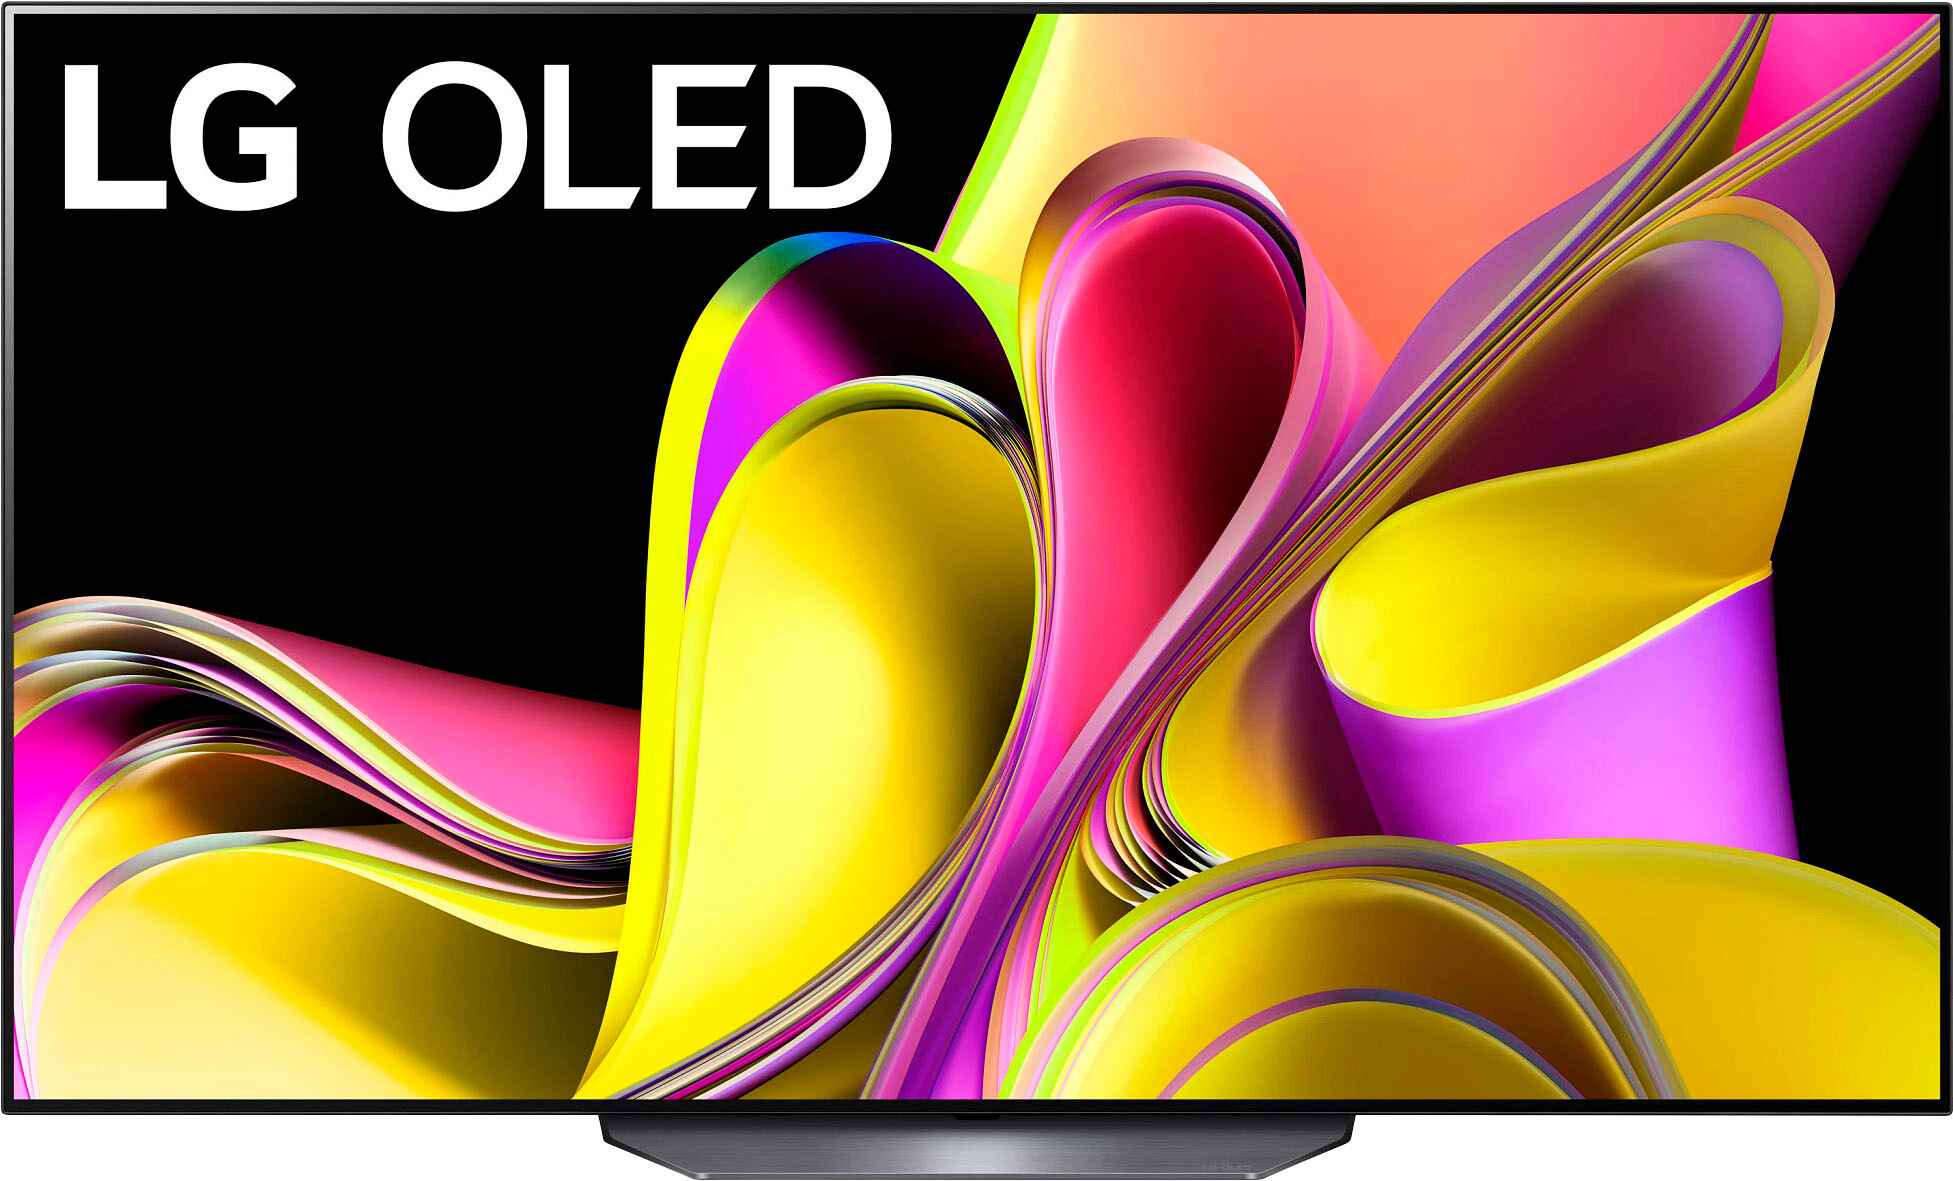 How To Connect LG OLED TV To DirecTV